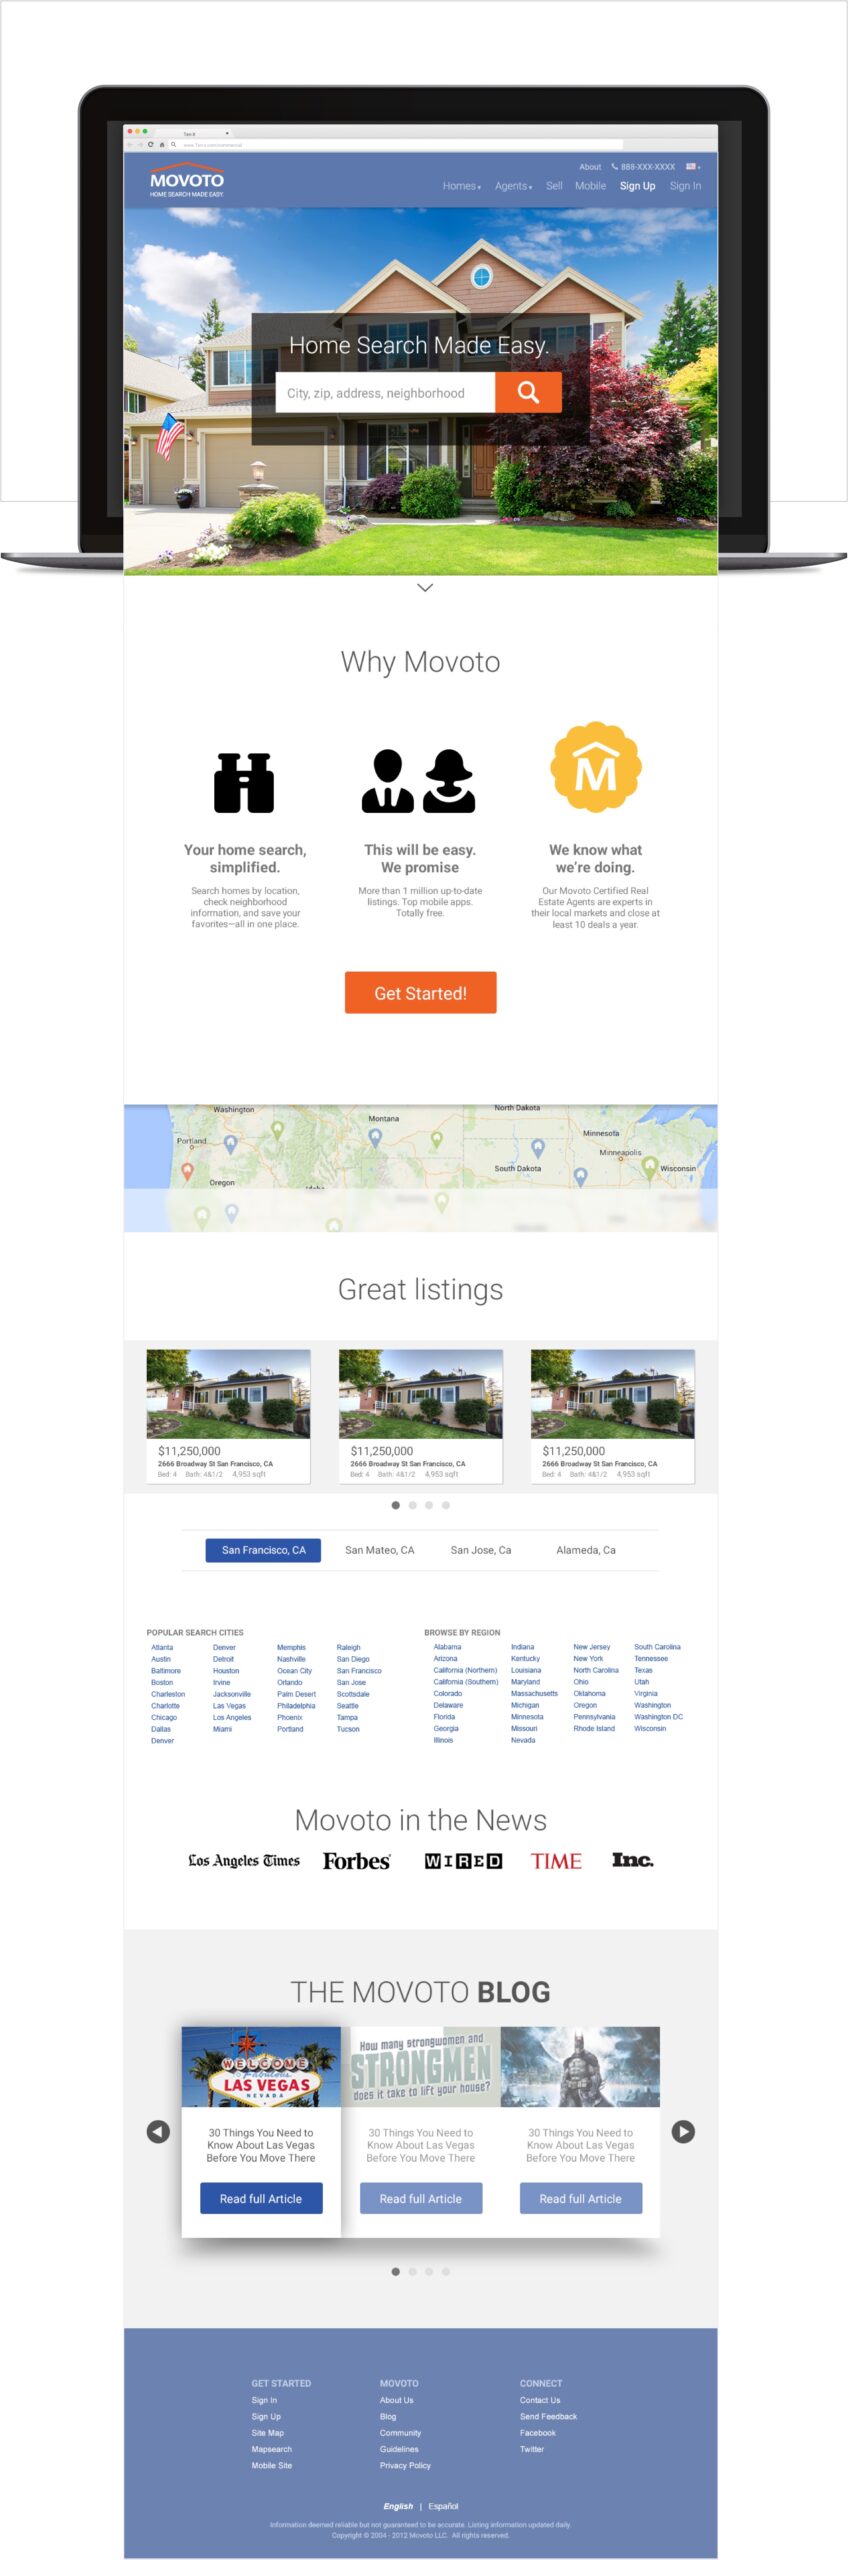 one-of-many-landing-pages-scaled